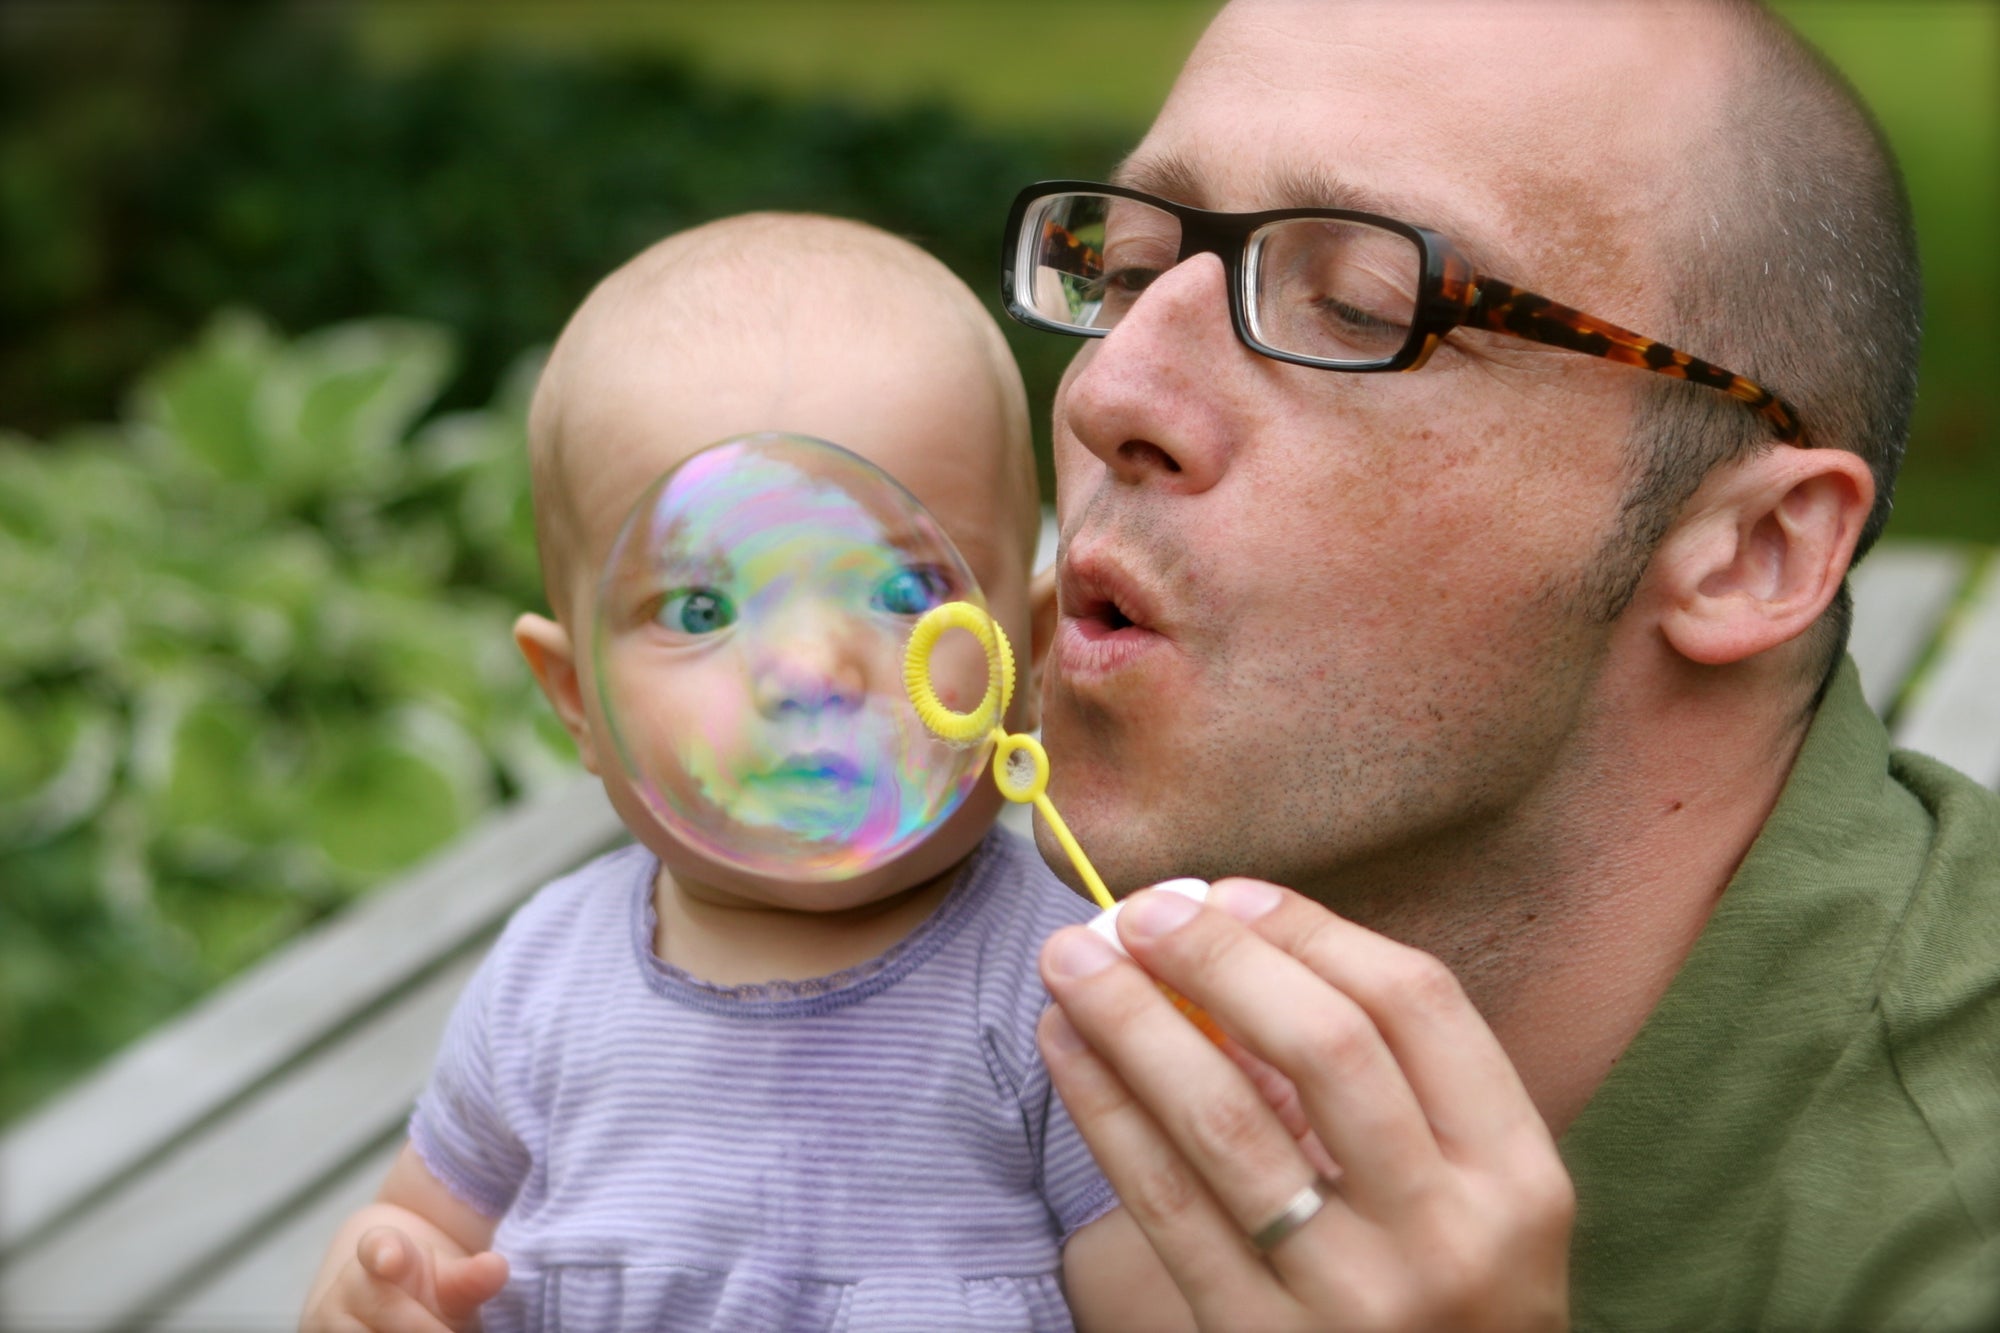 A father playing with his child, showing bubbles